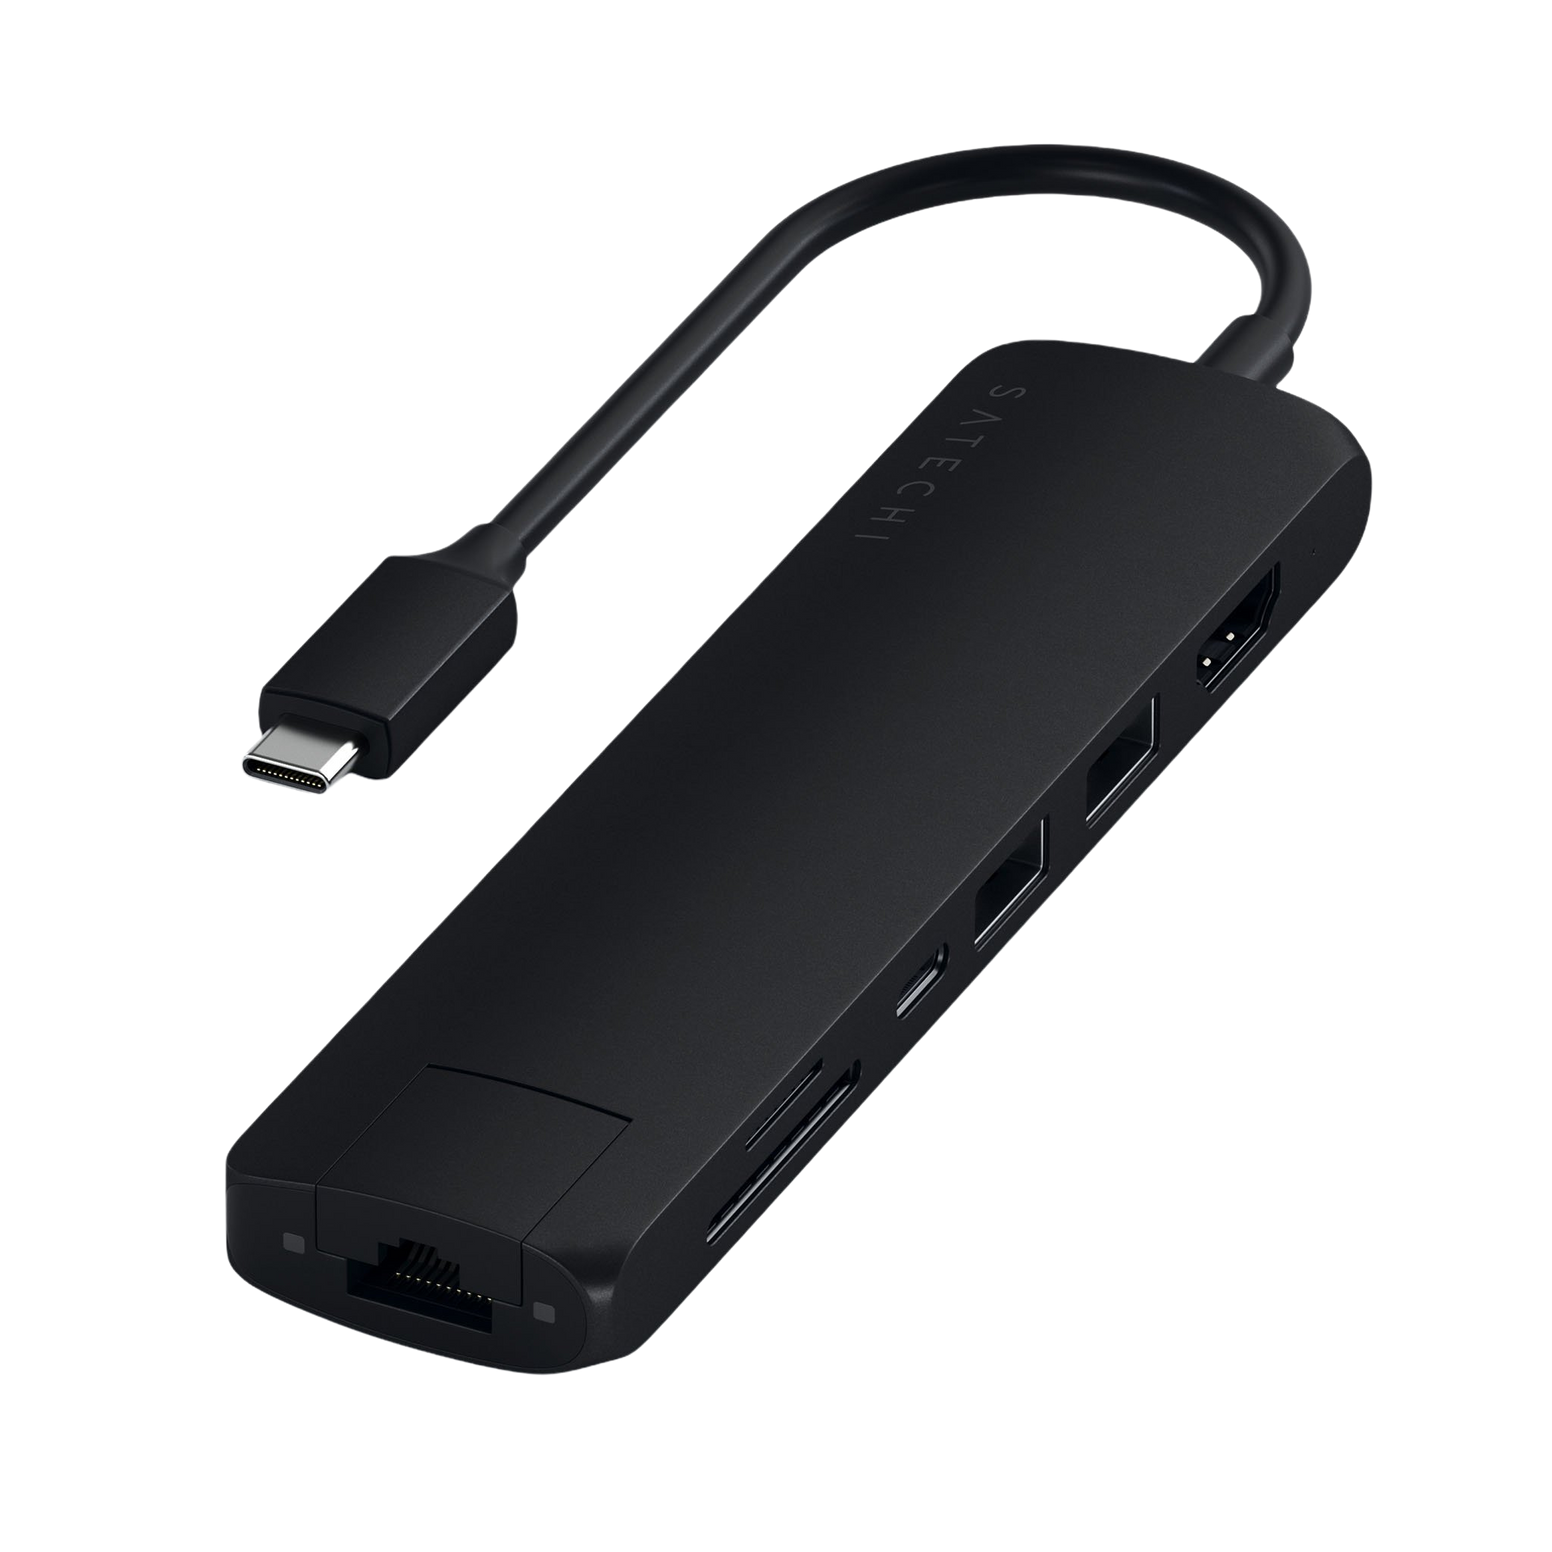 Satechi Type-C Slim Multiport with Ethernet Adapter - Black